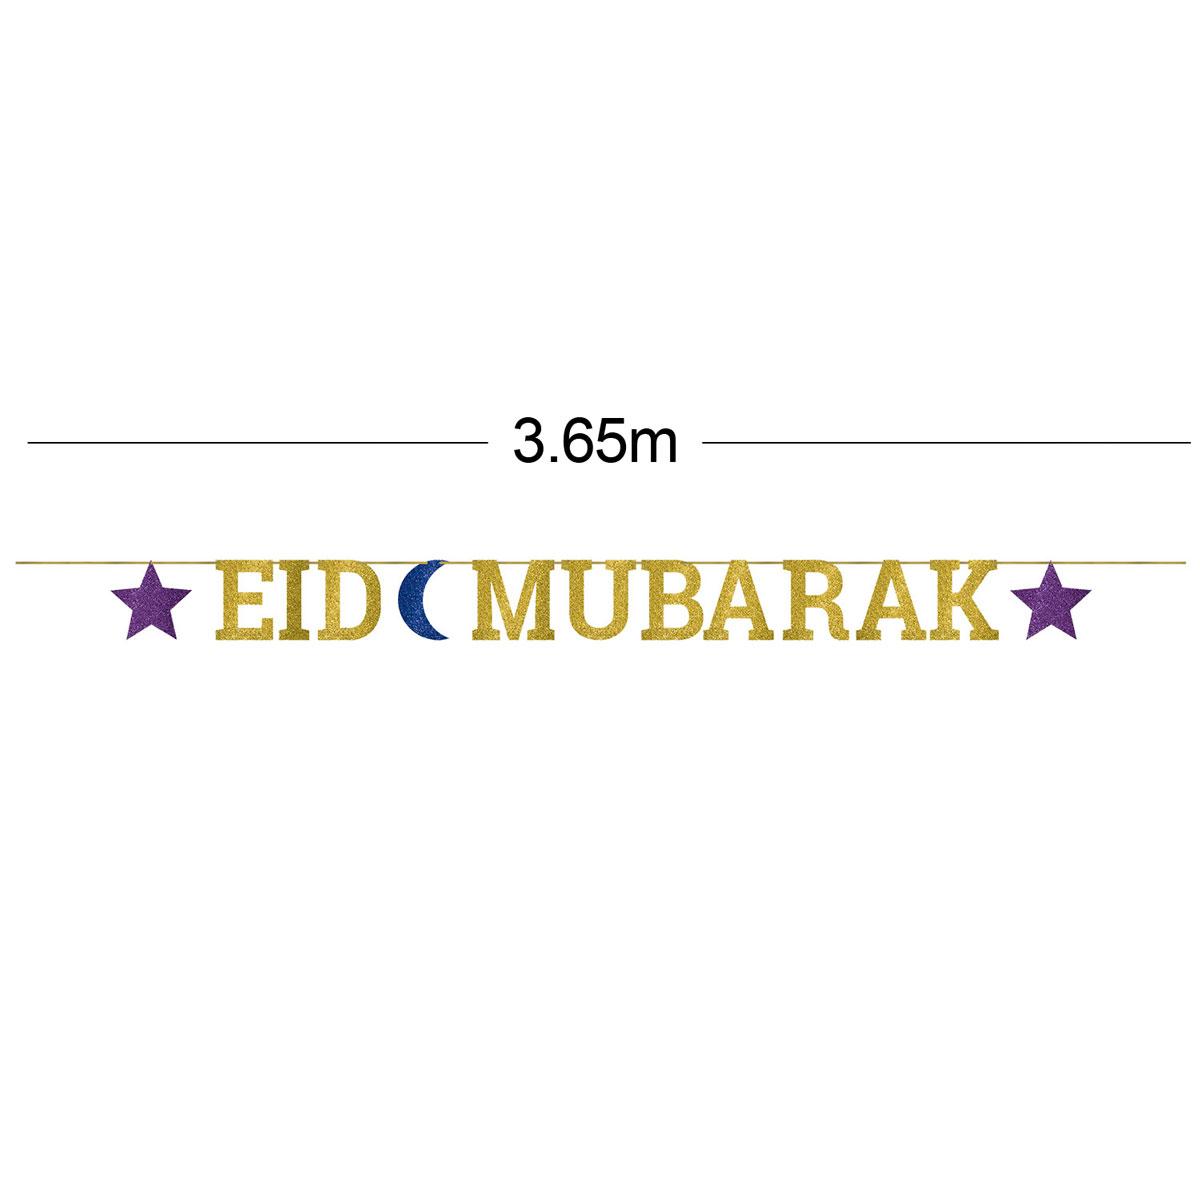 Eid Mubarak Letter Banner 3.65m by Amscan 120359 available here at Karnival Costumes online party shop